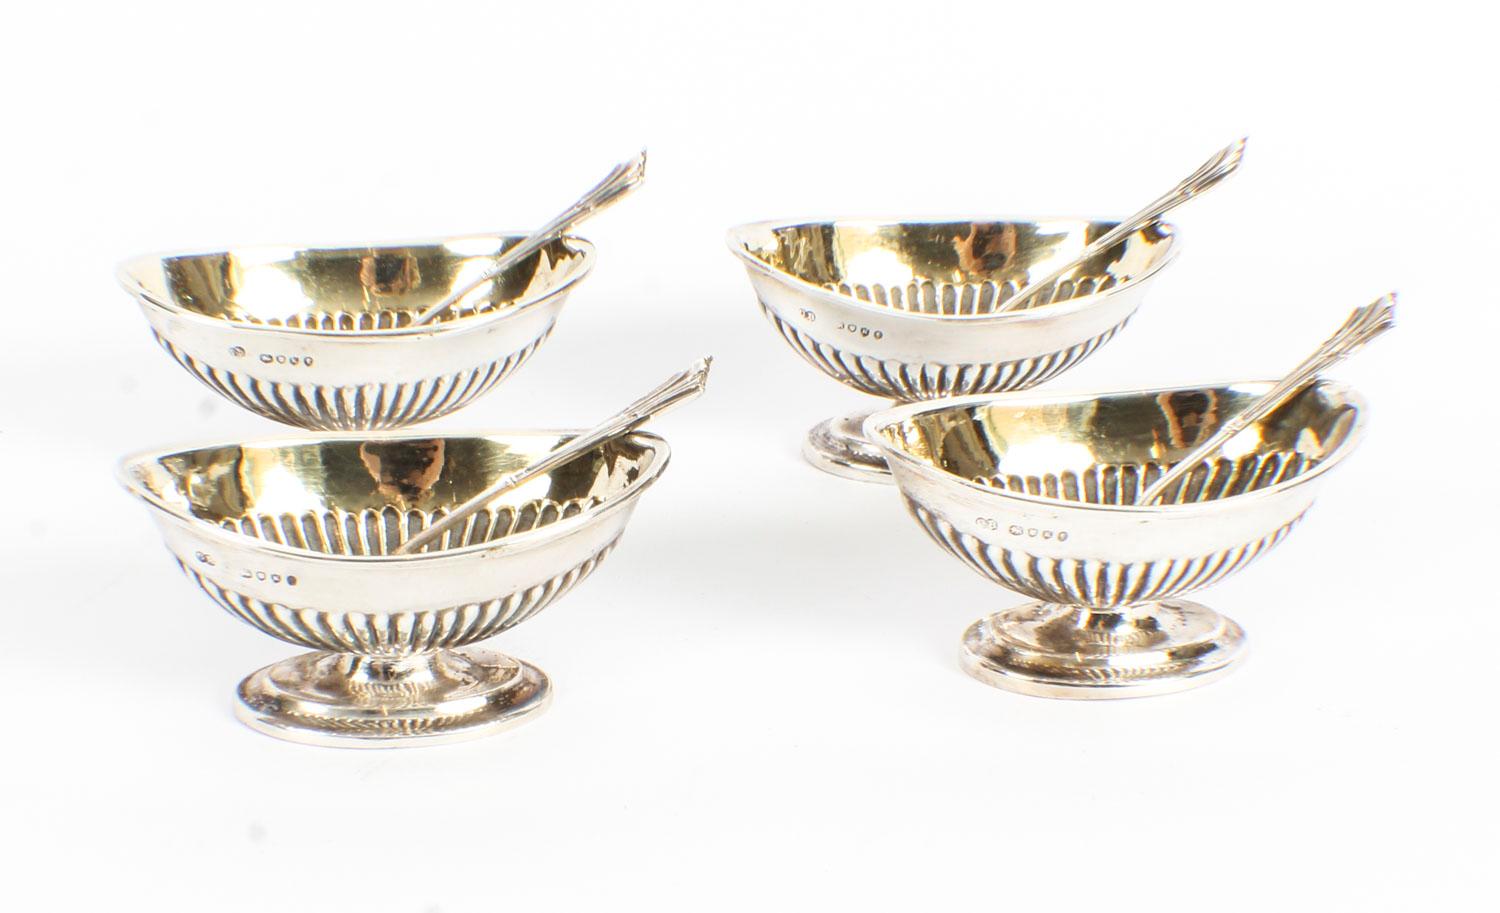 English Antique Set of 4 Silver Gilt Salts with Spoons Charles Boyton 1885, 19th Century